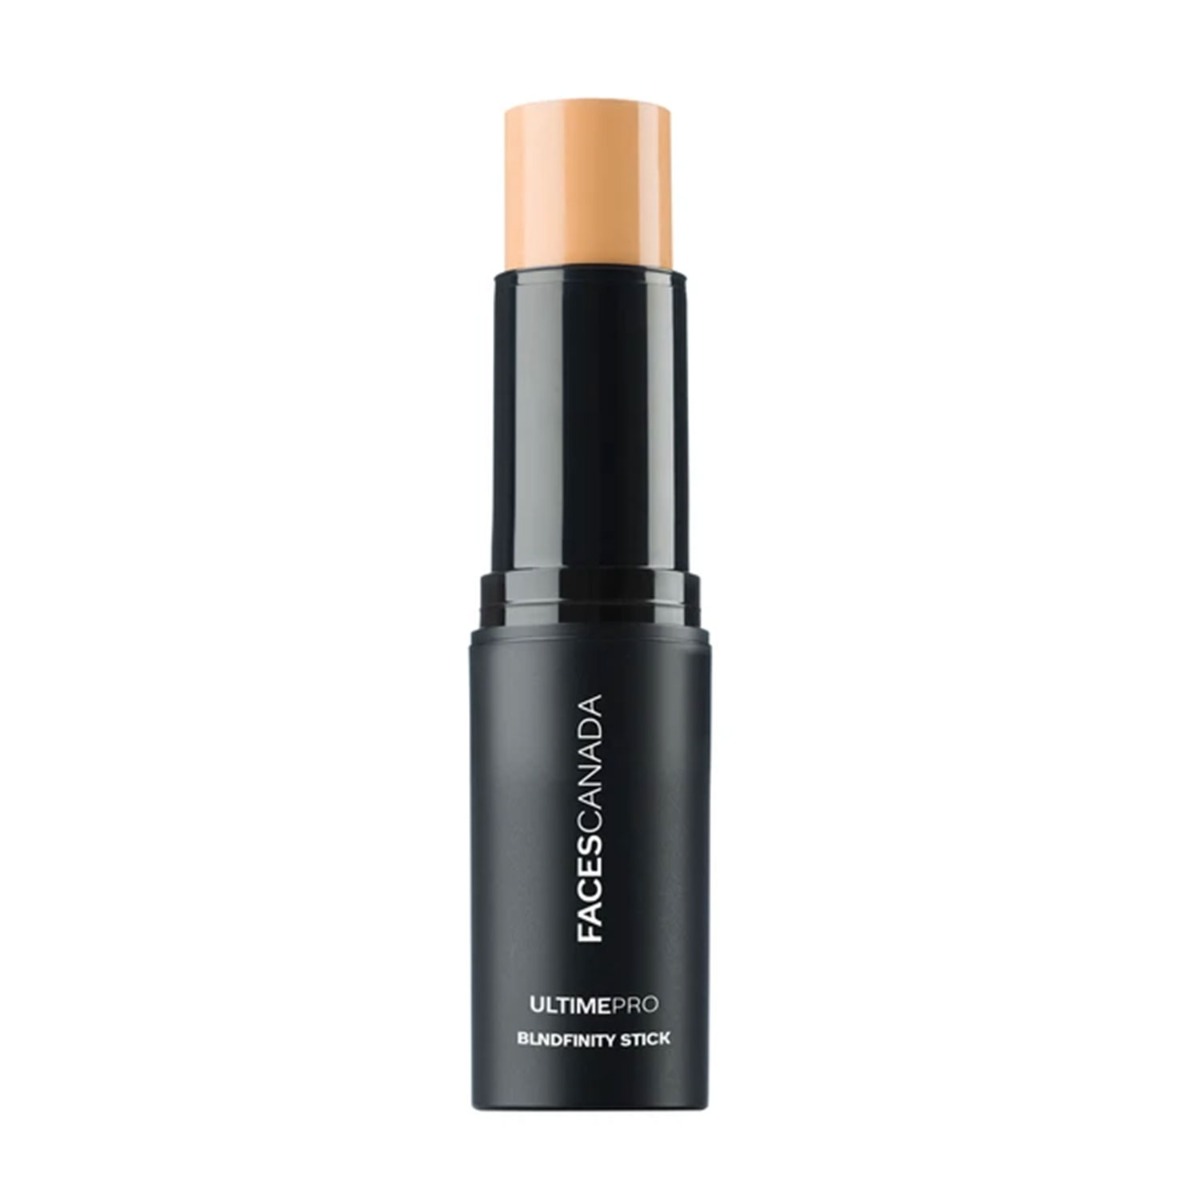 Faces Canada Ultime Pro Blend Finity Stick Foundation, 10gm